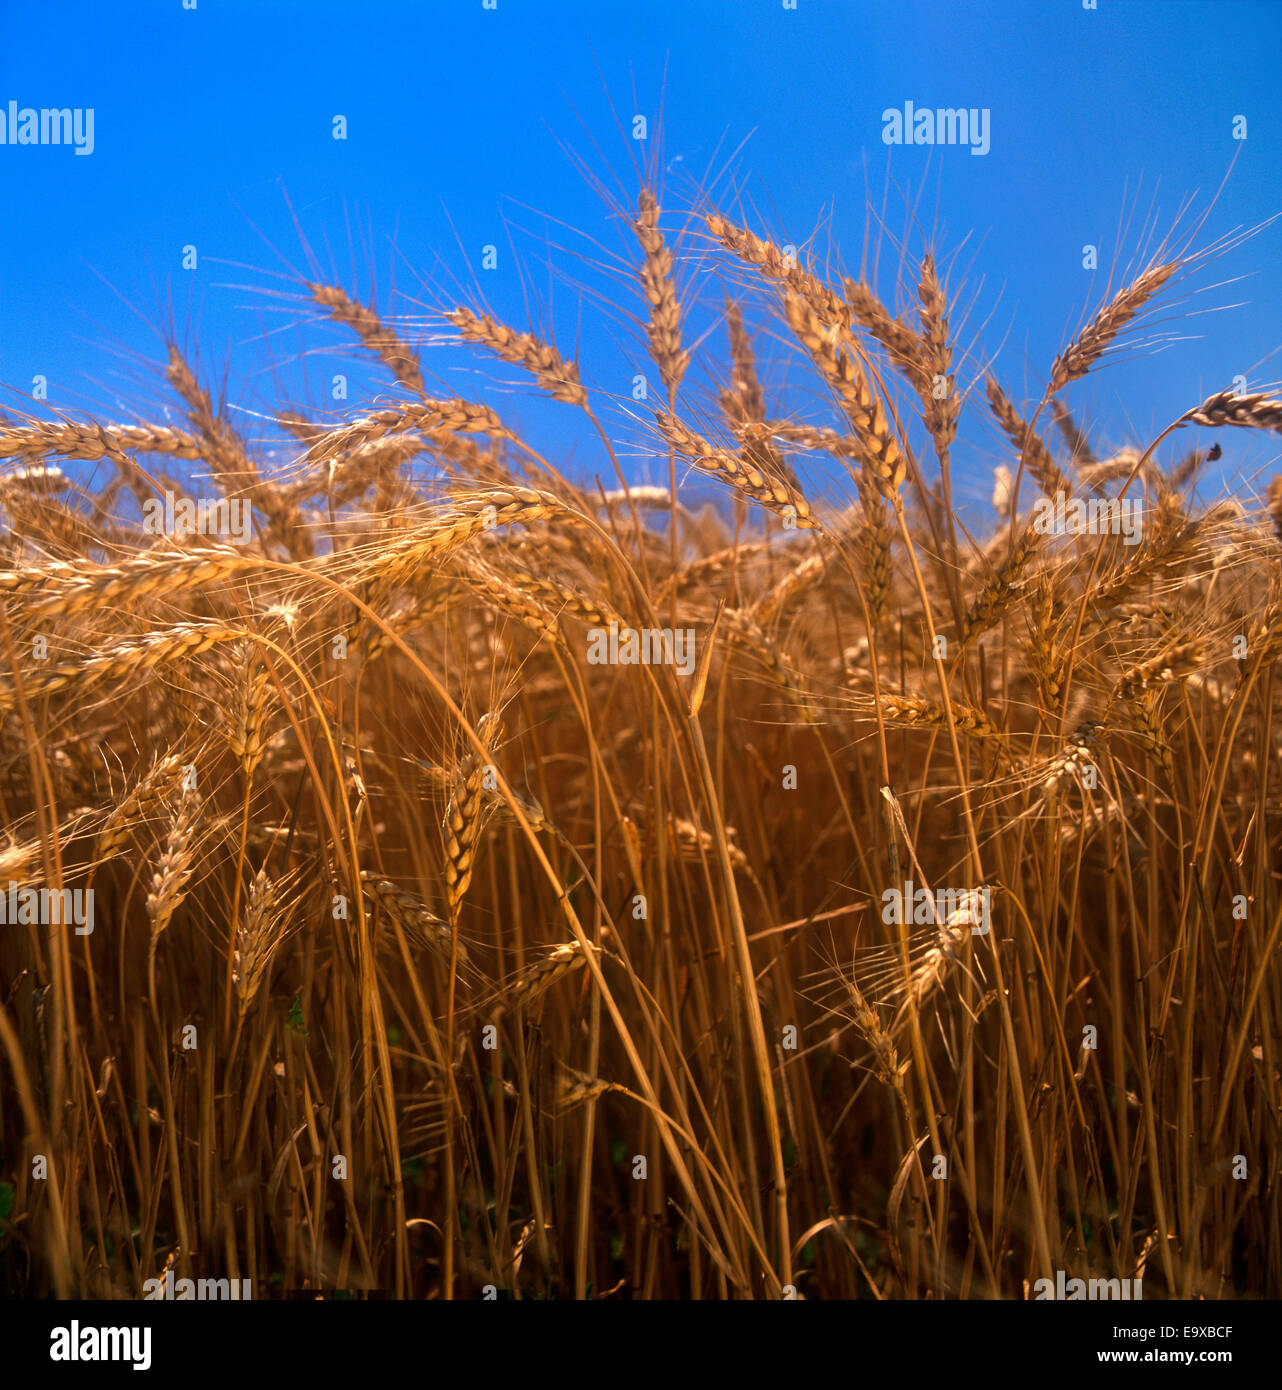 A stand of mature awned, or bearded, wheat heads in late afternoon light with a blue sky in the background / Ontario, Canada. Stock Photo